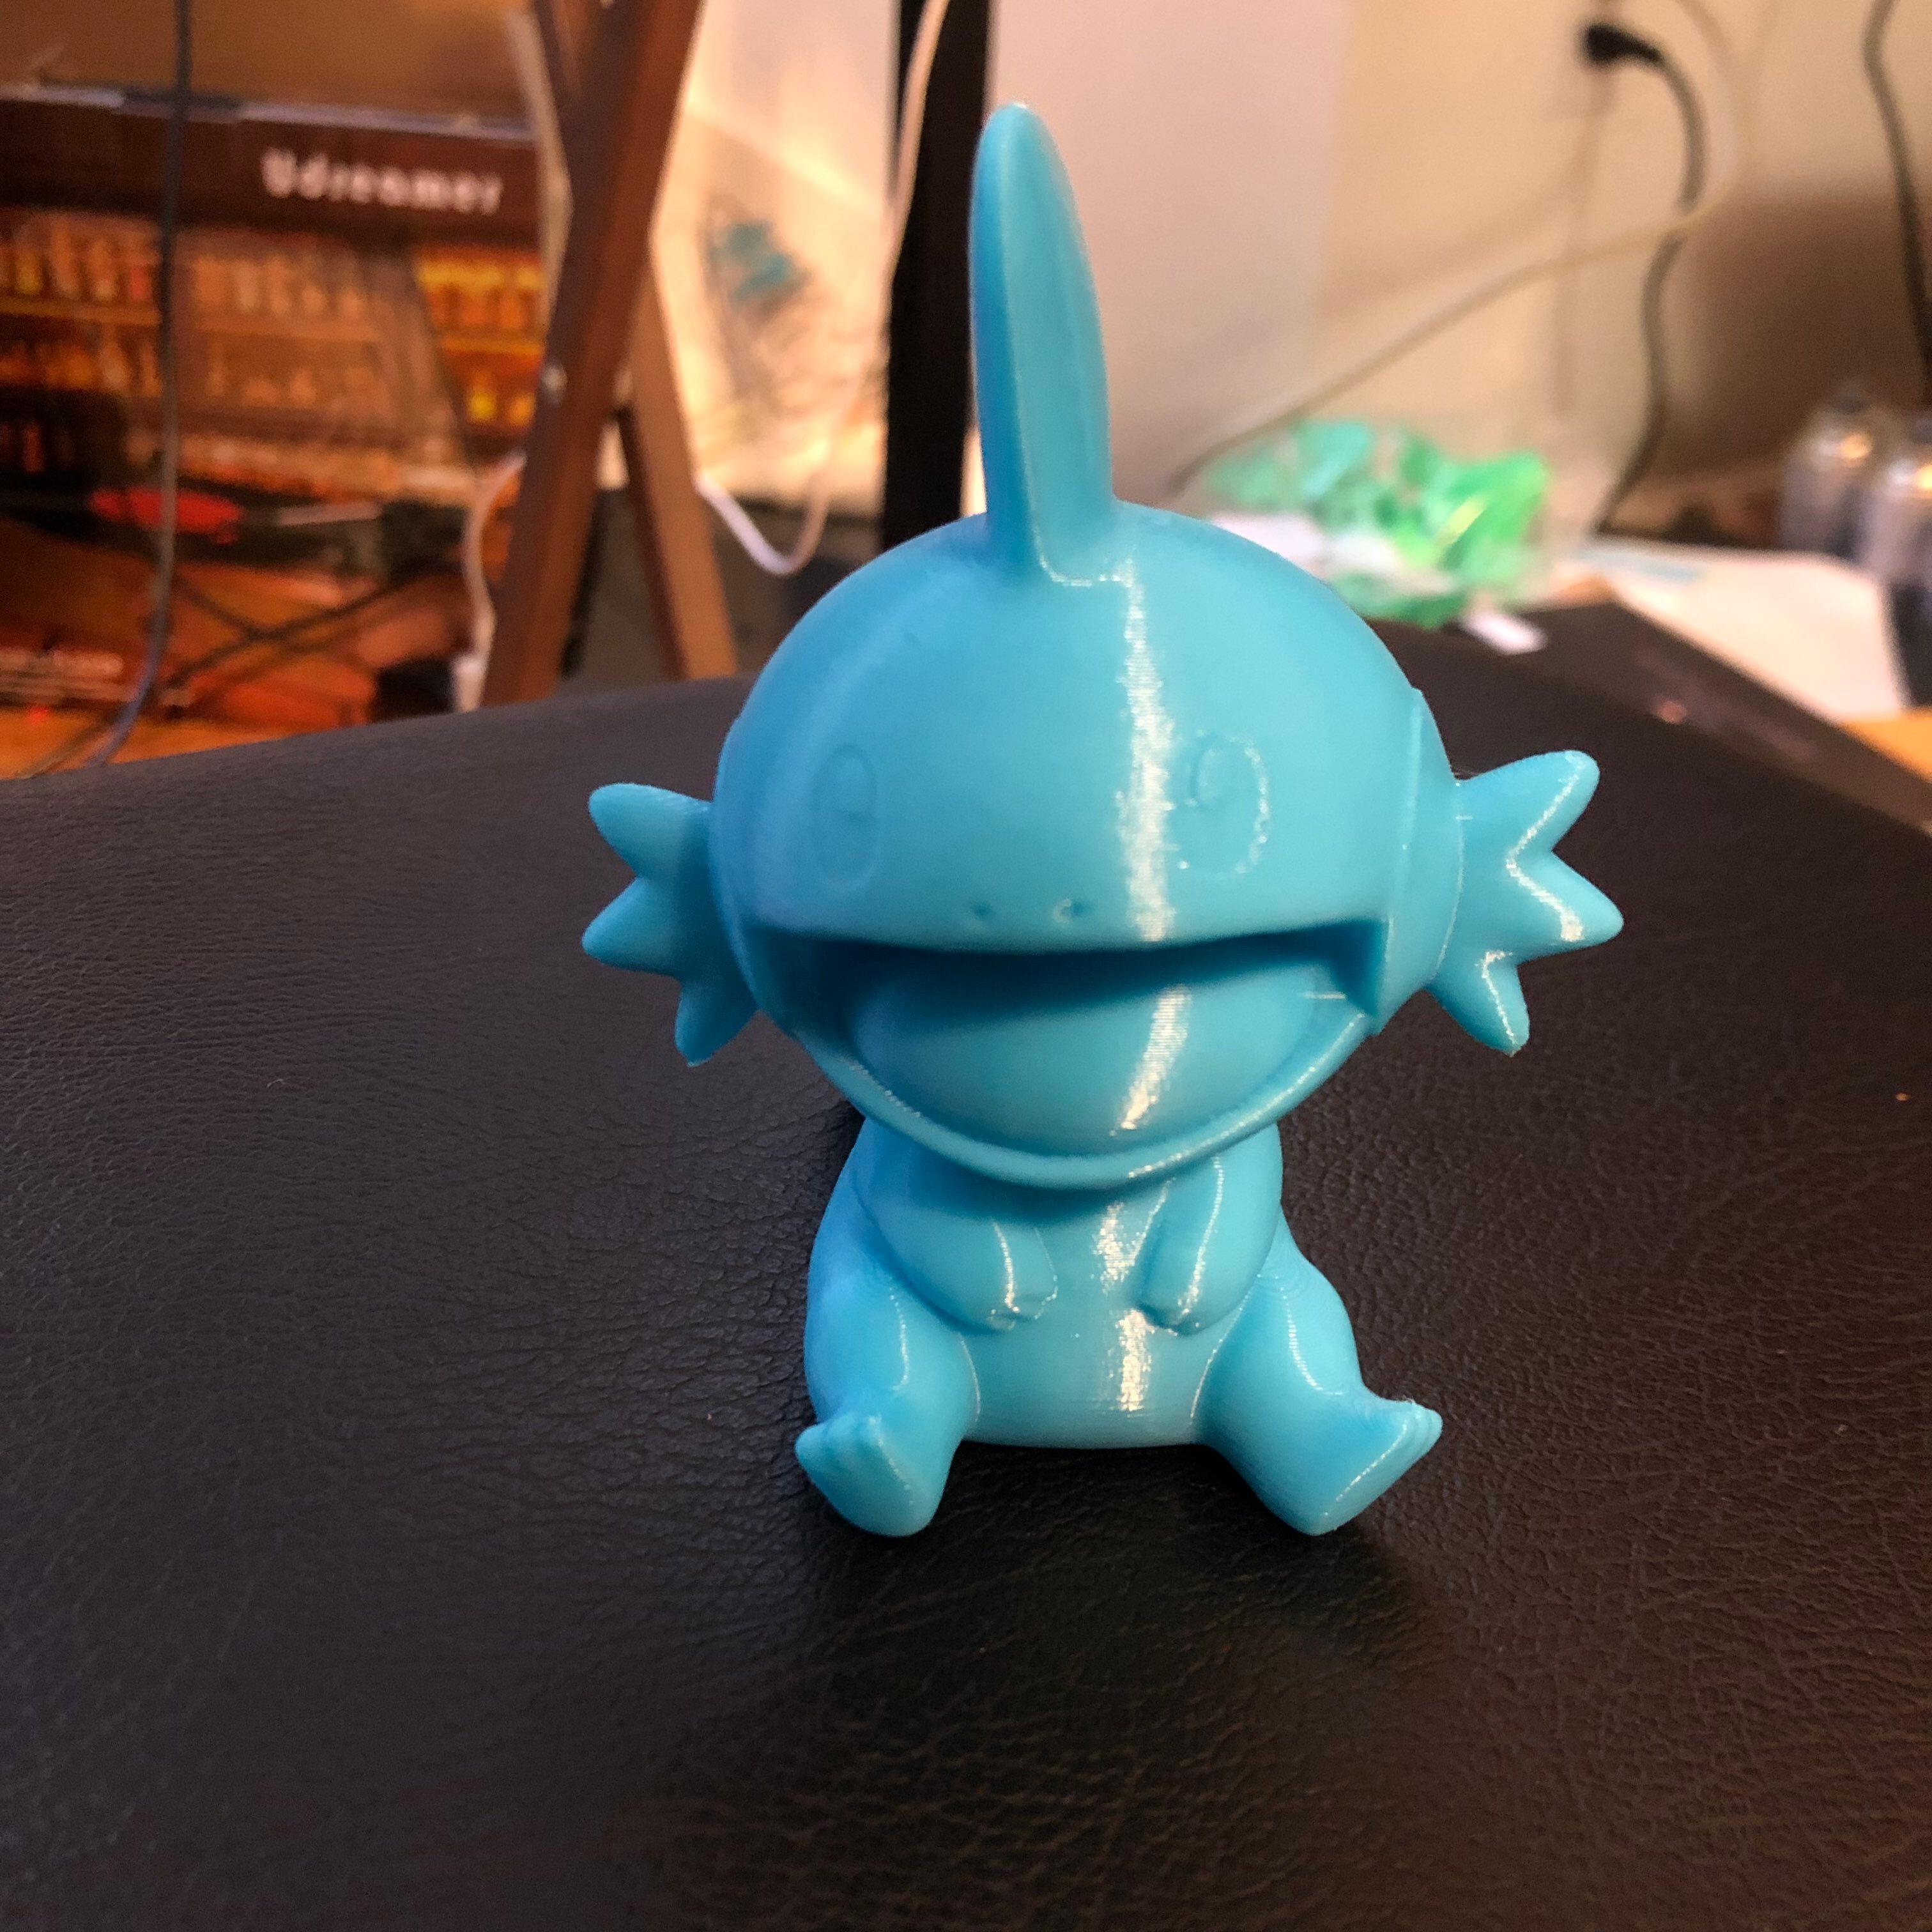 Mudkip(Pokemon) - Printed on Prusa MK3S.  .2mm layer height with a .4 mm nozzle.  Printed in Matterhackers Light Blue PLA. 
 - 3d model